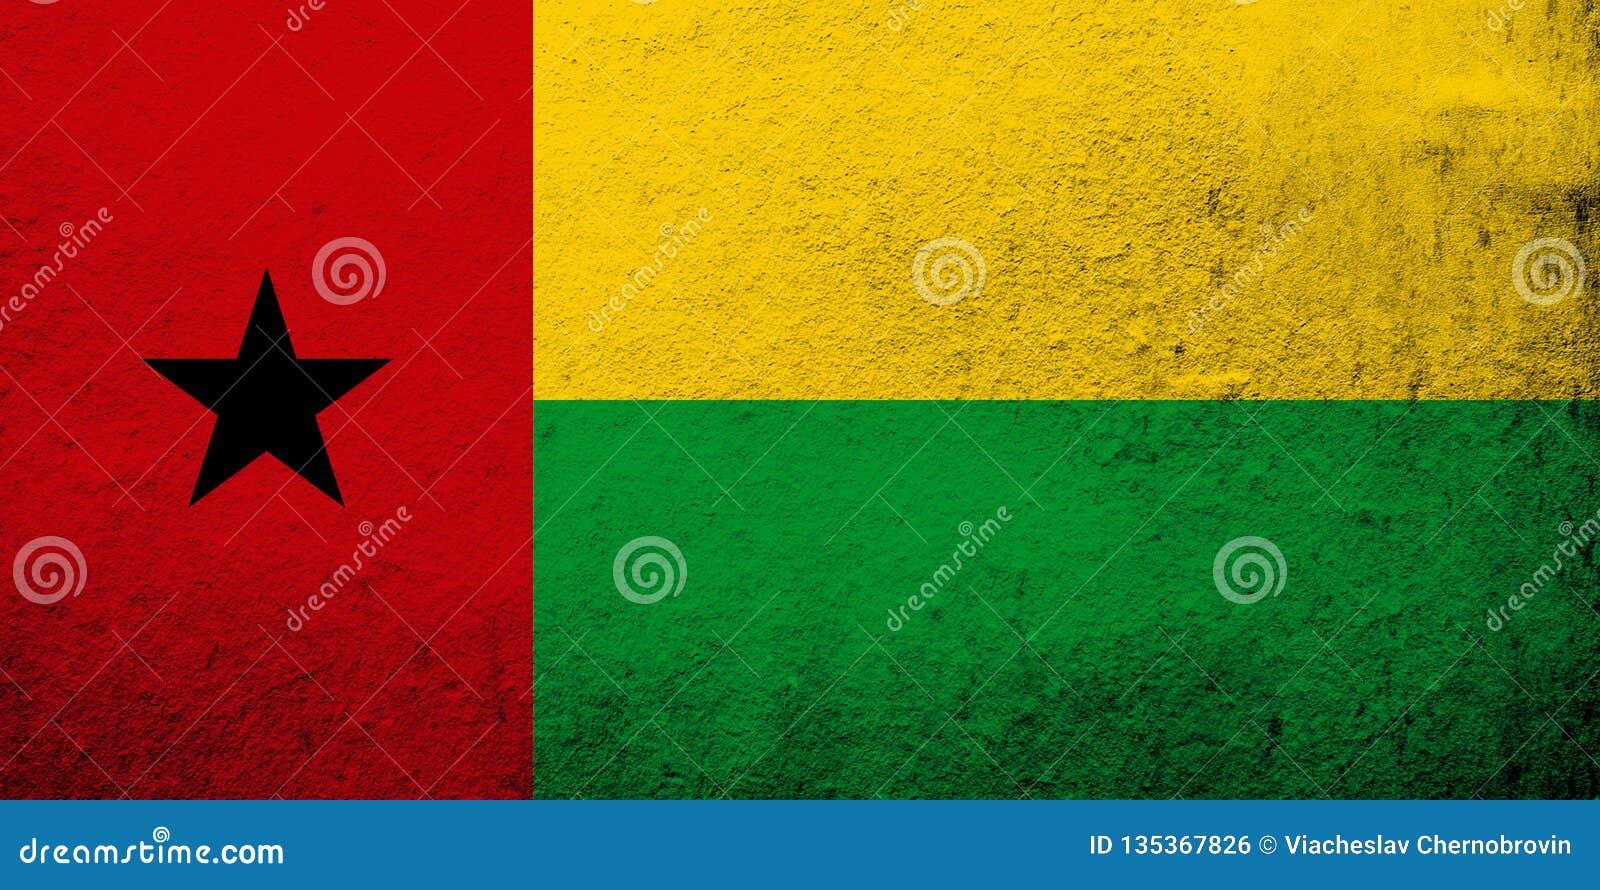 the republic of guinea-bissau national flag. grunge background